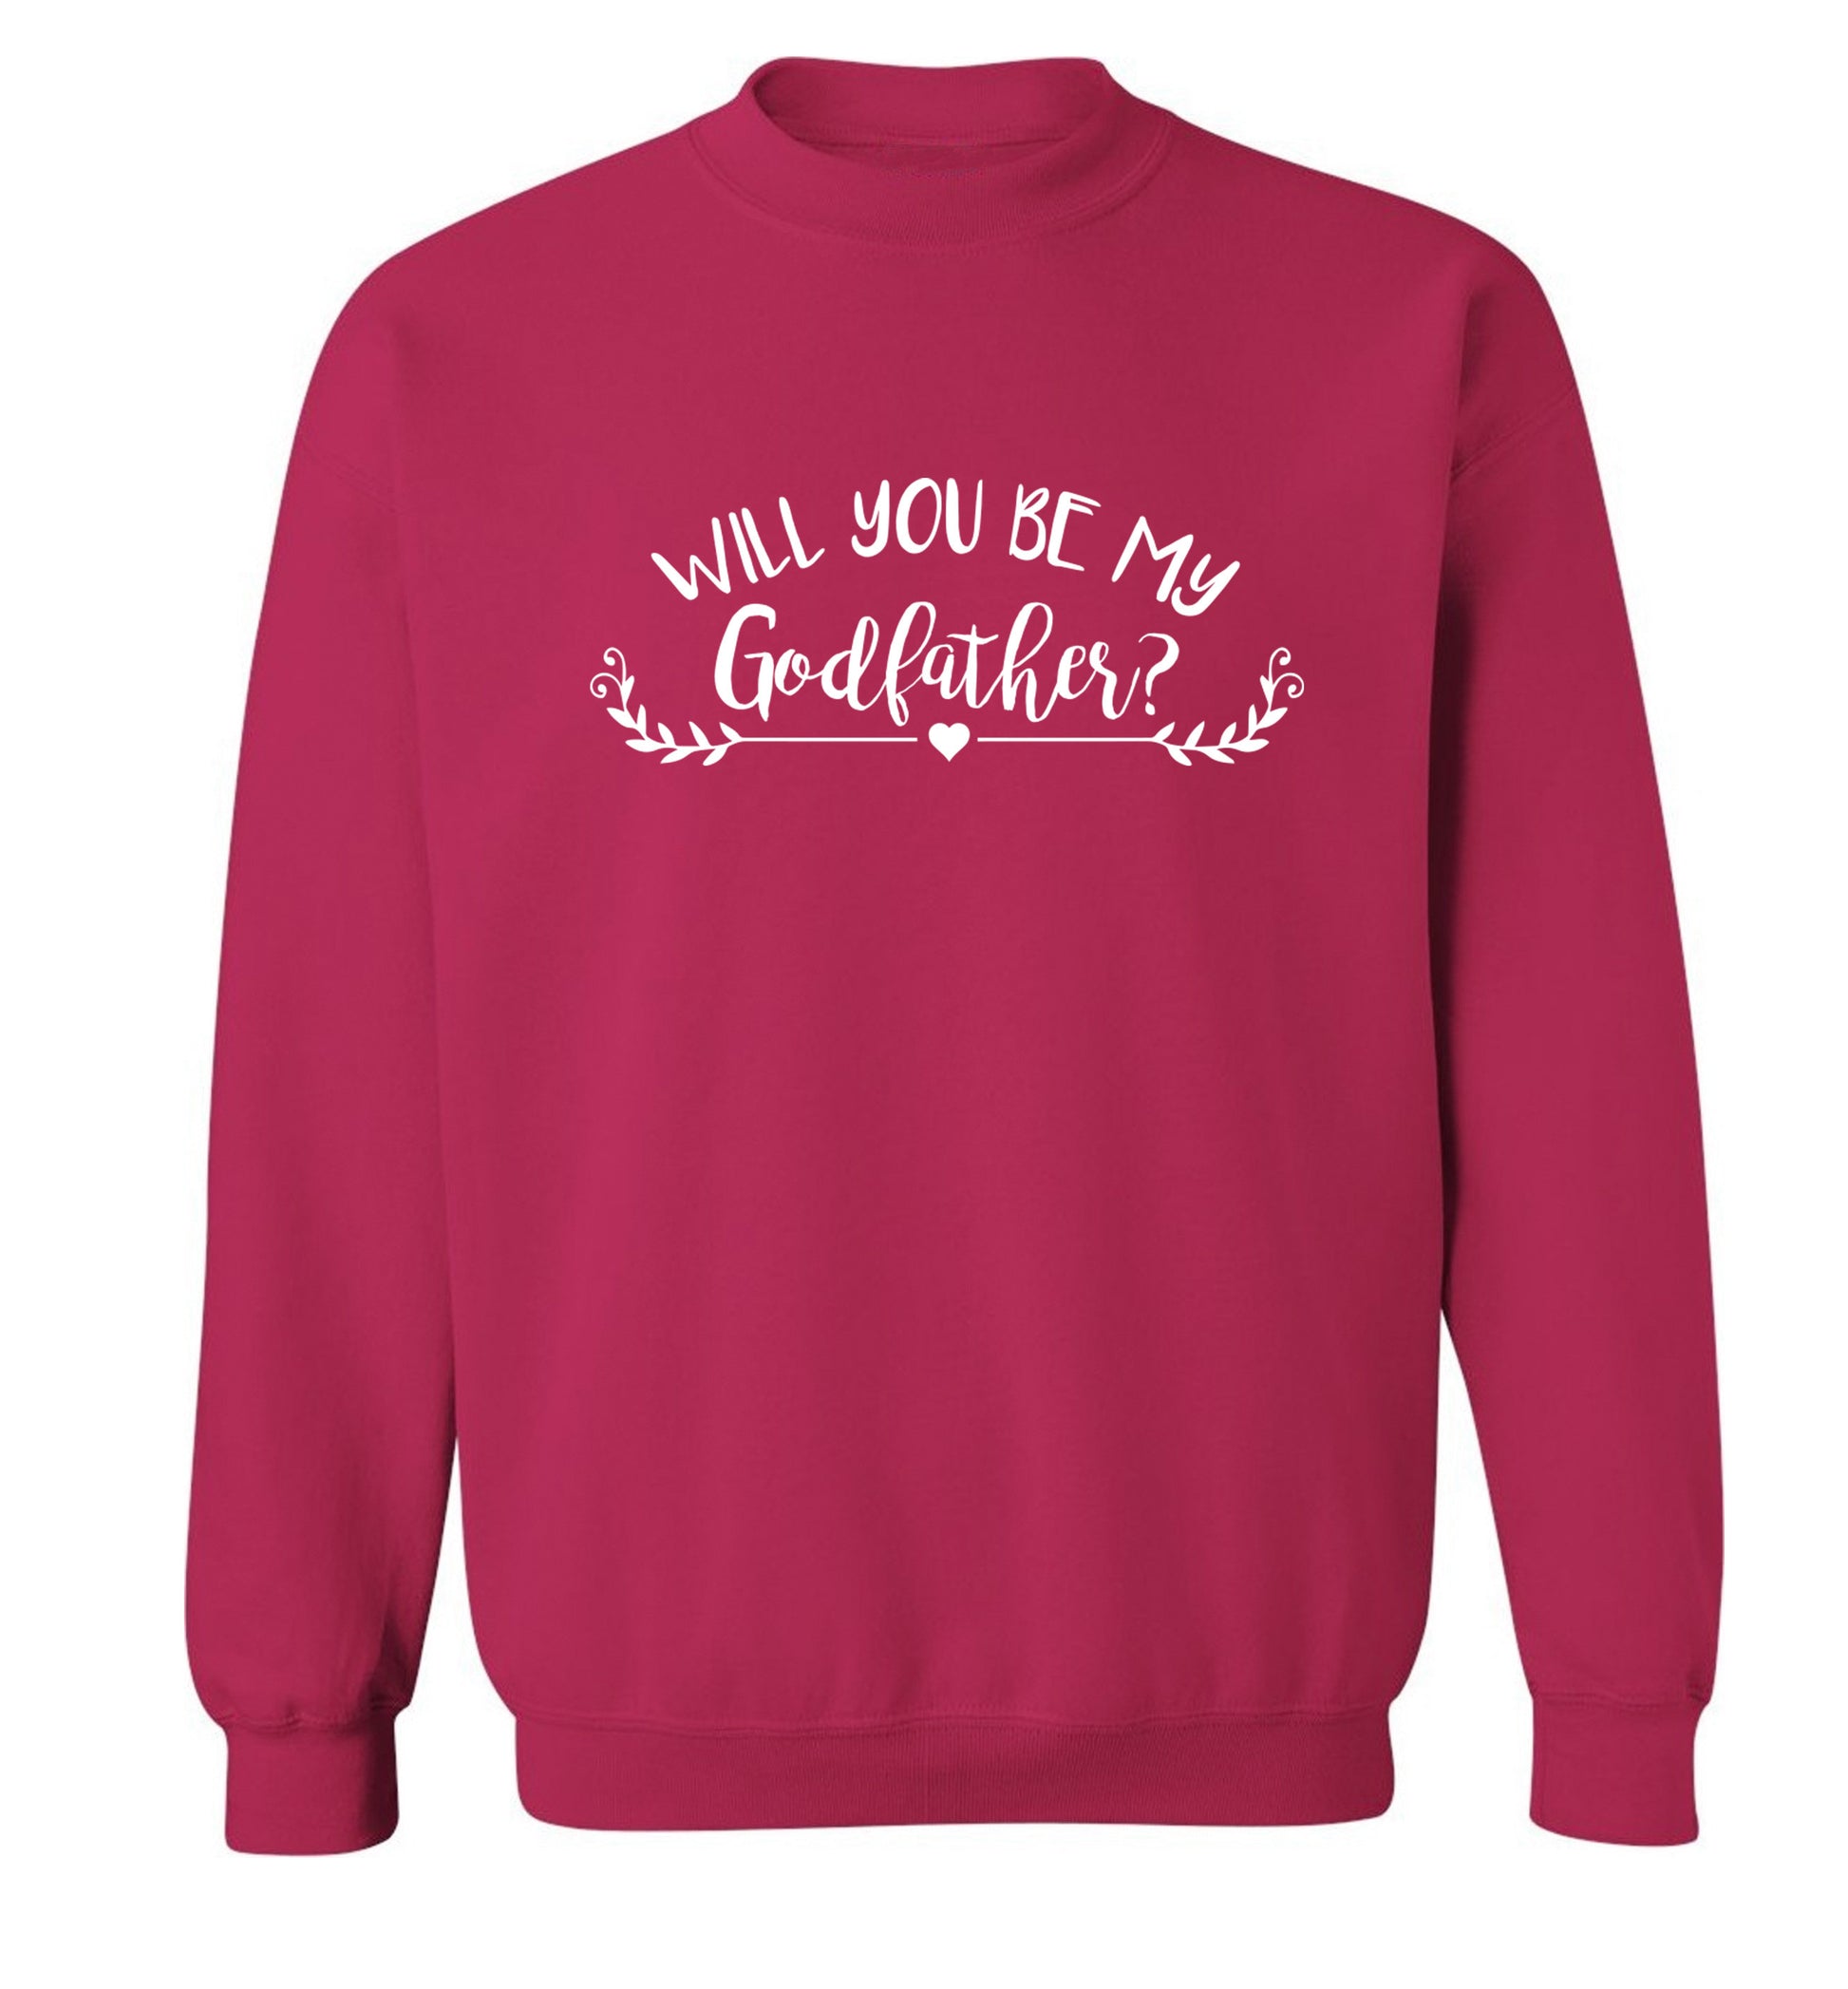 Will you be my godfather? Adult's unisex pink Sweater 2XL